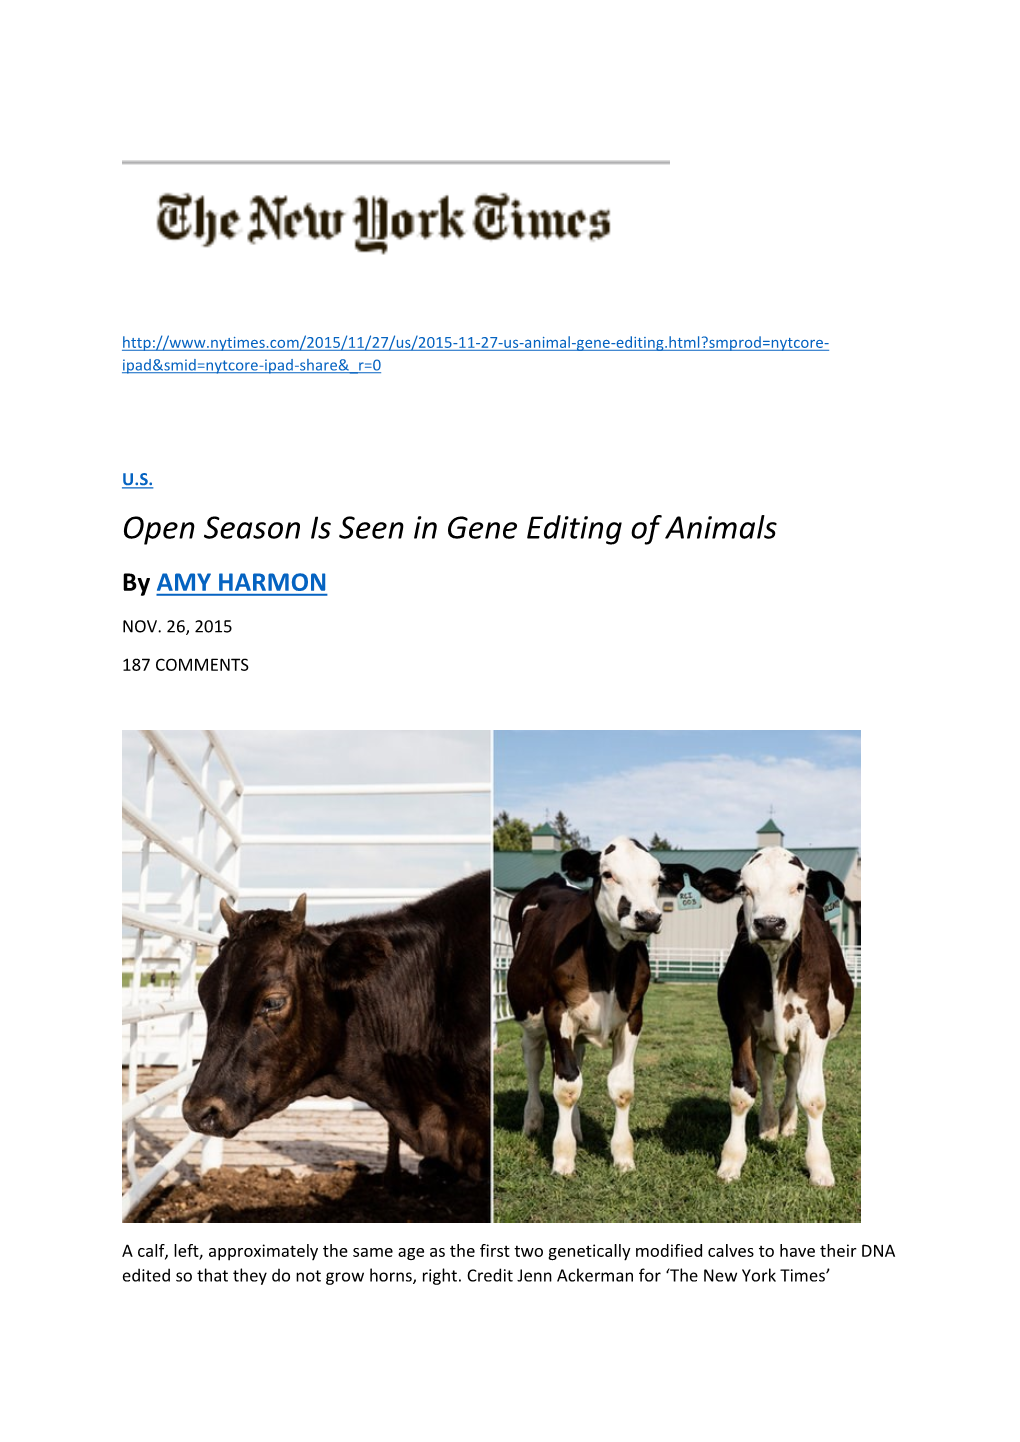 Open Season Is Seen in Gene Editing of Animals by AMY HARMON